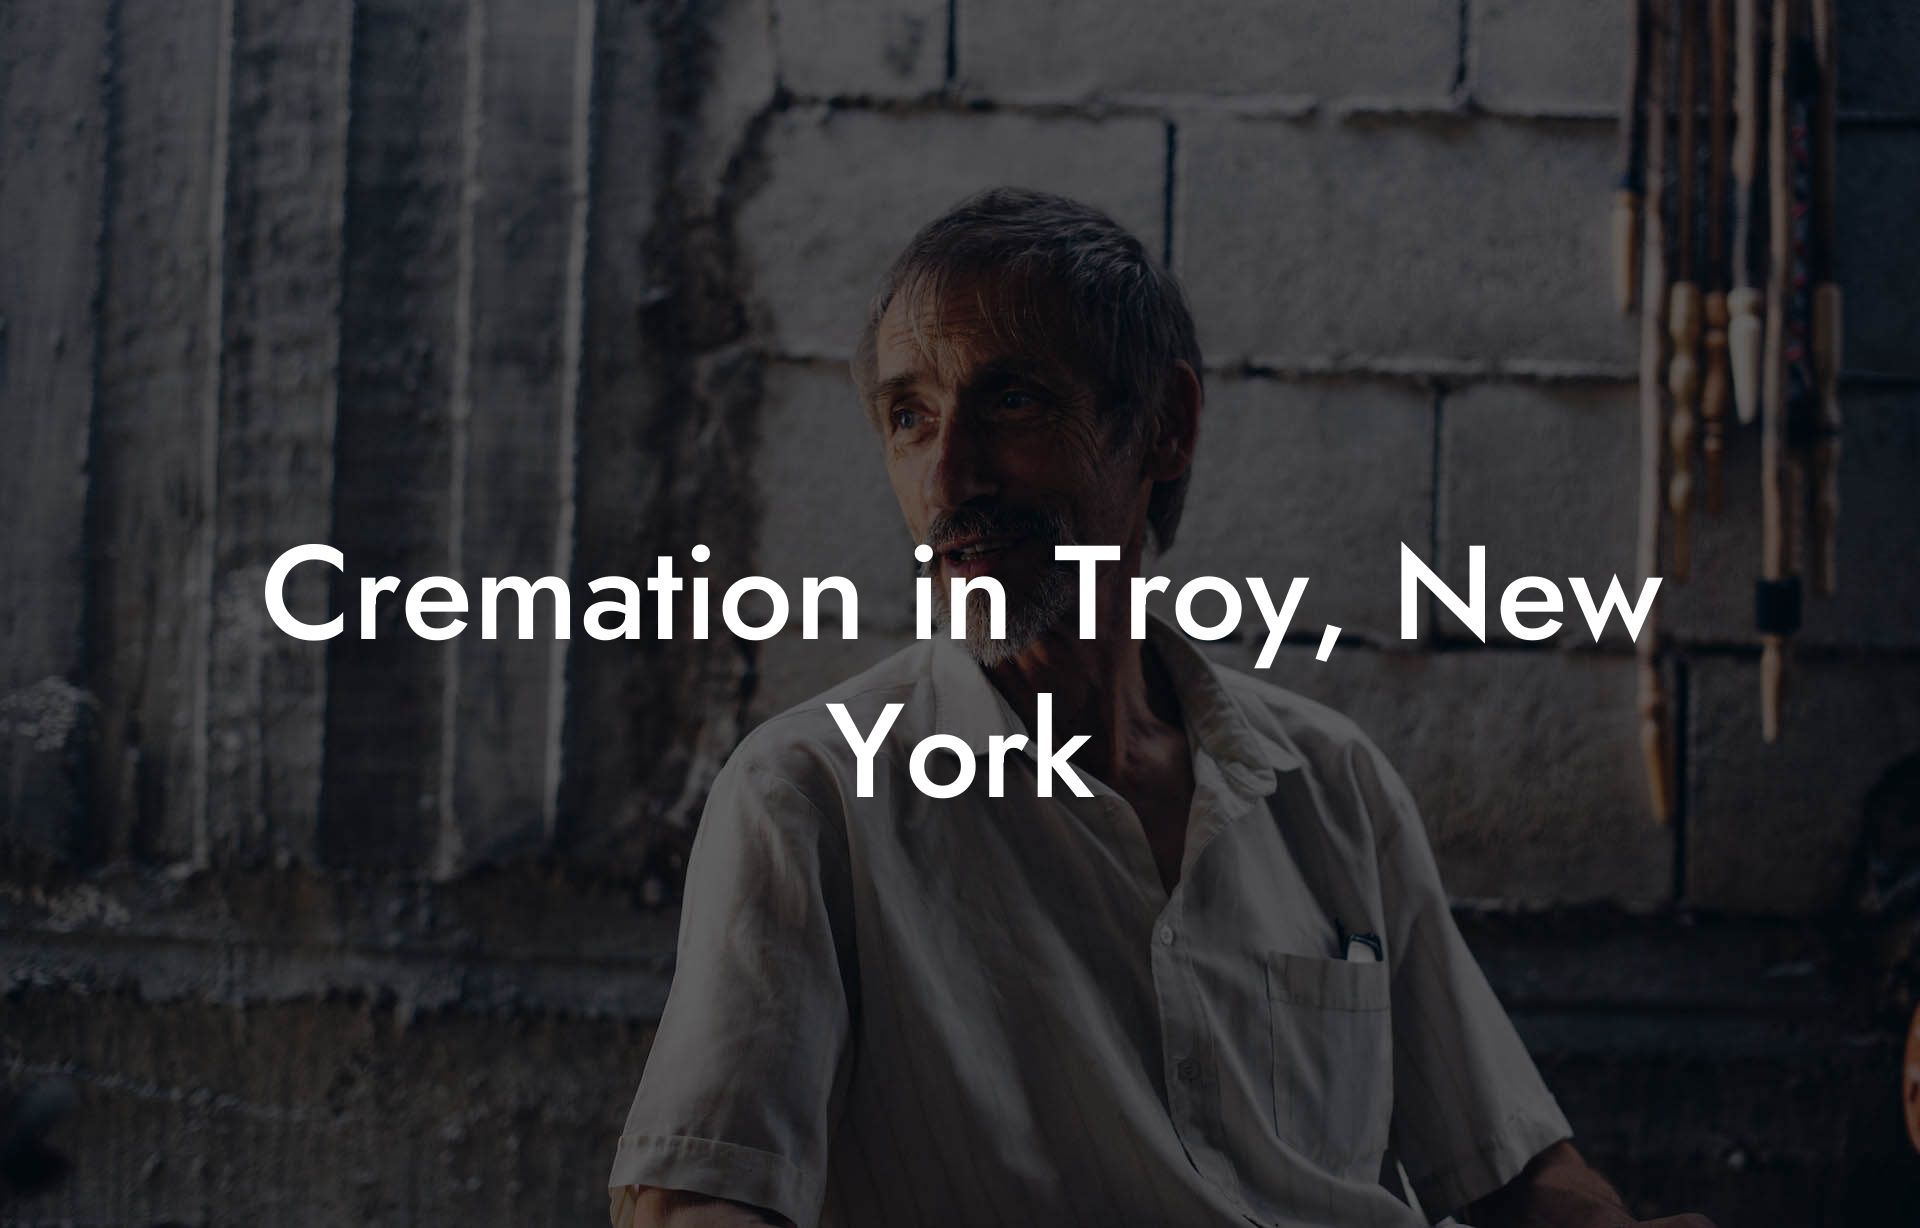 Cremation in Troy, New York